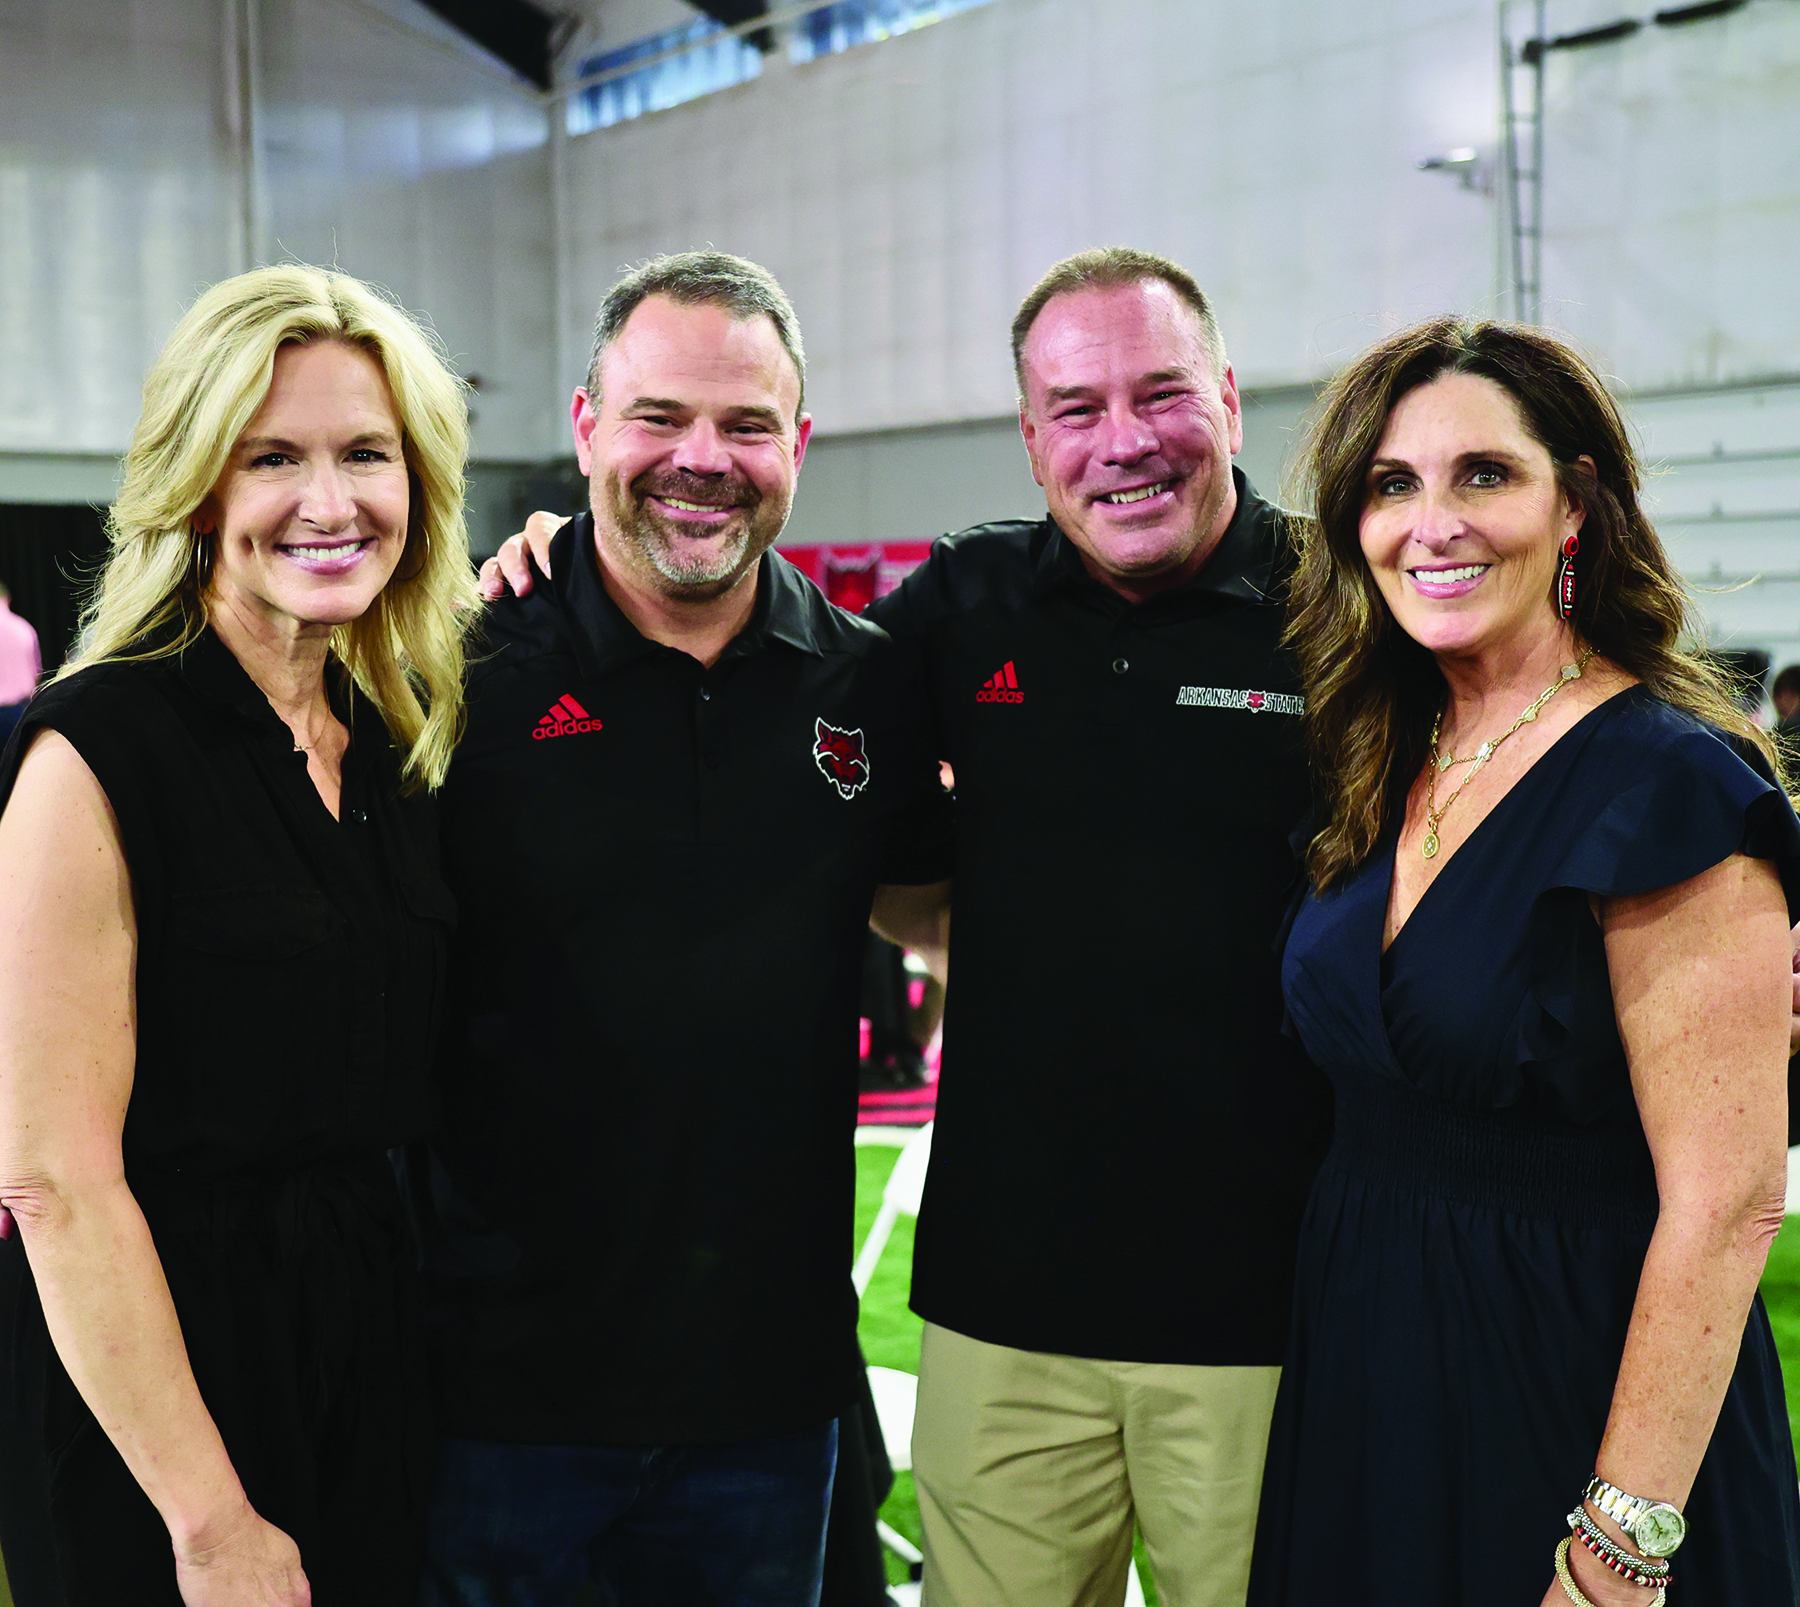 A-State Football Kick-Off Party